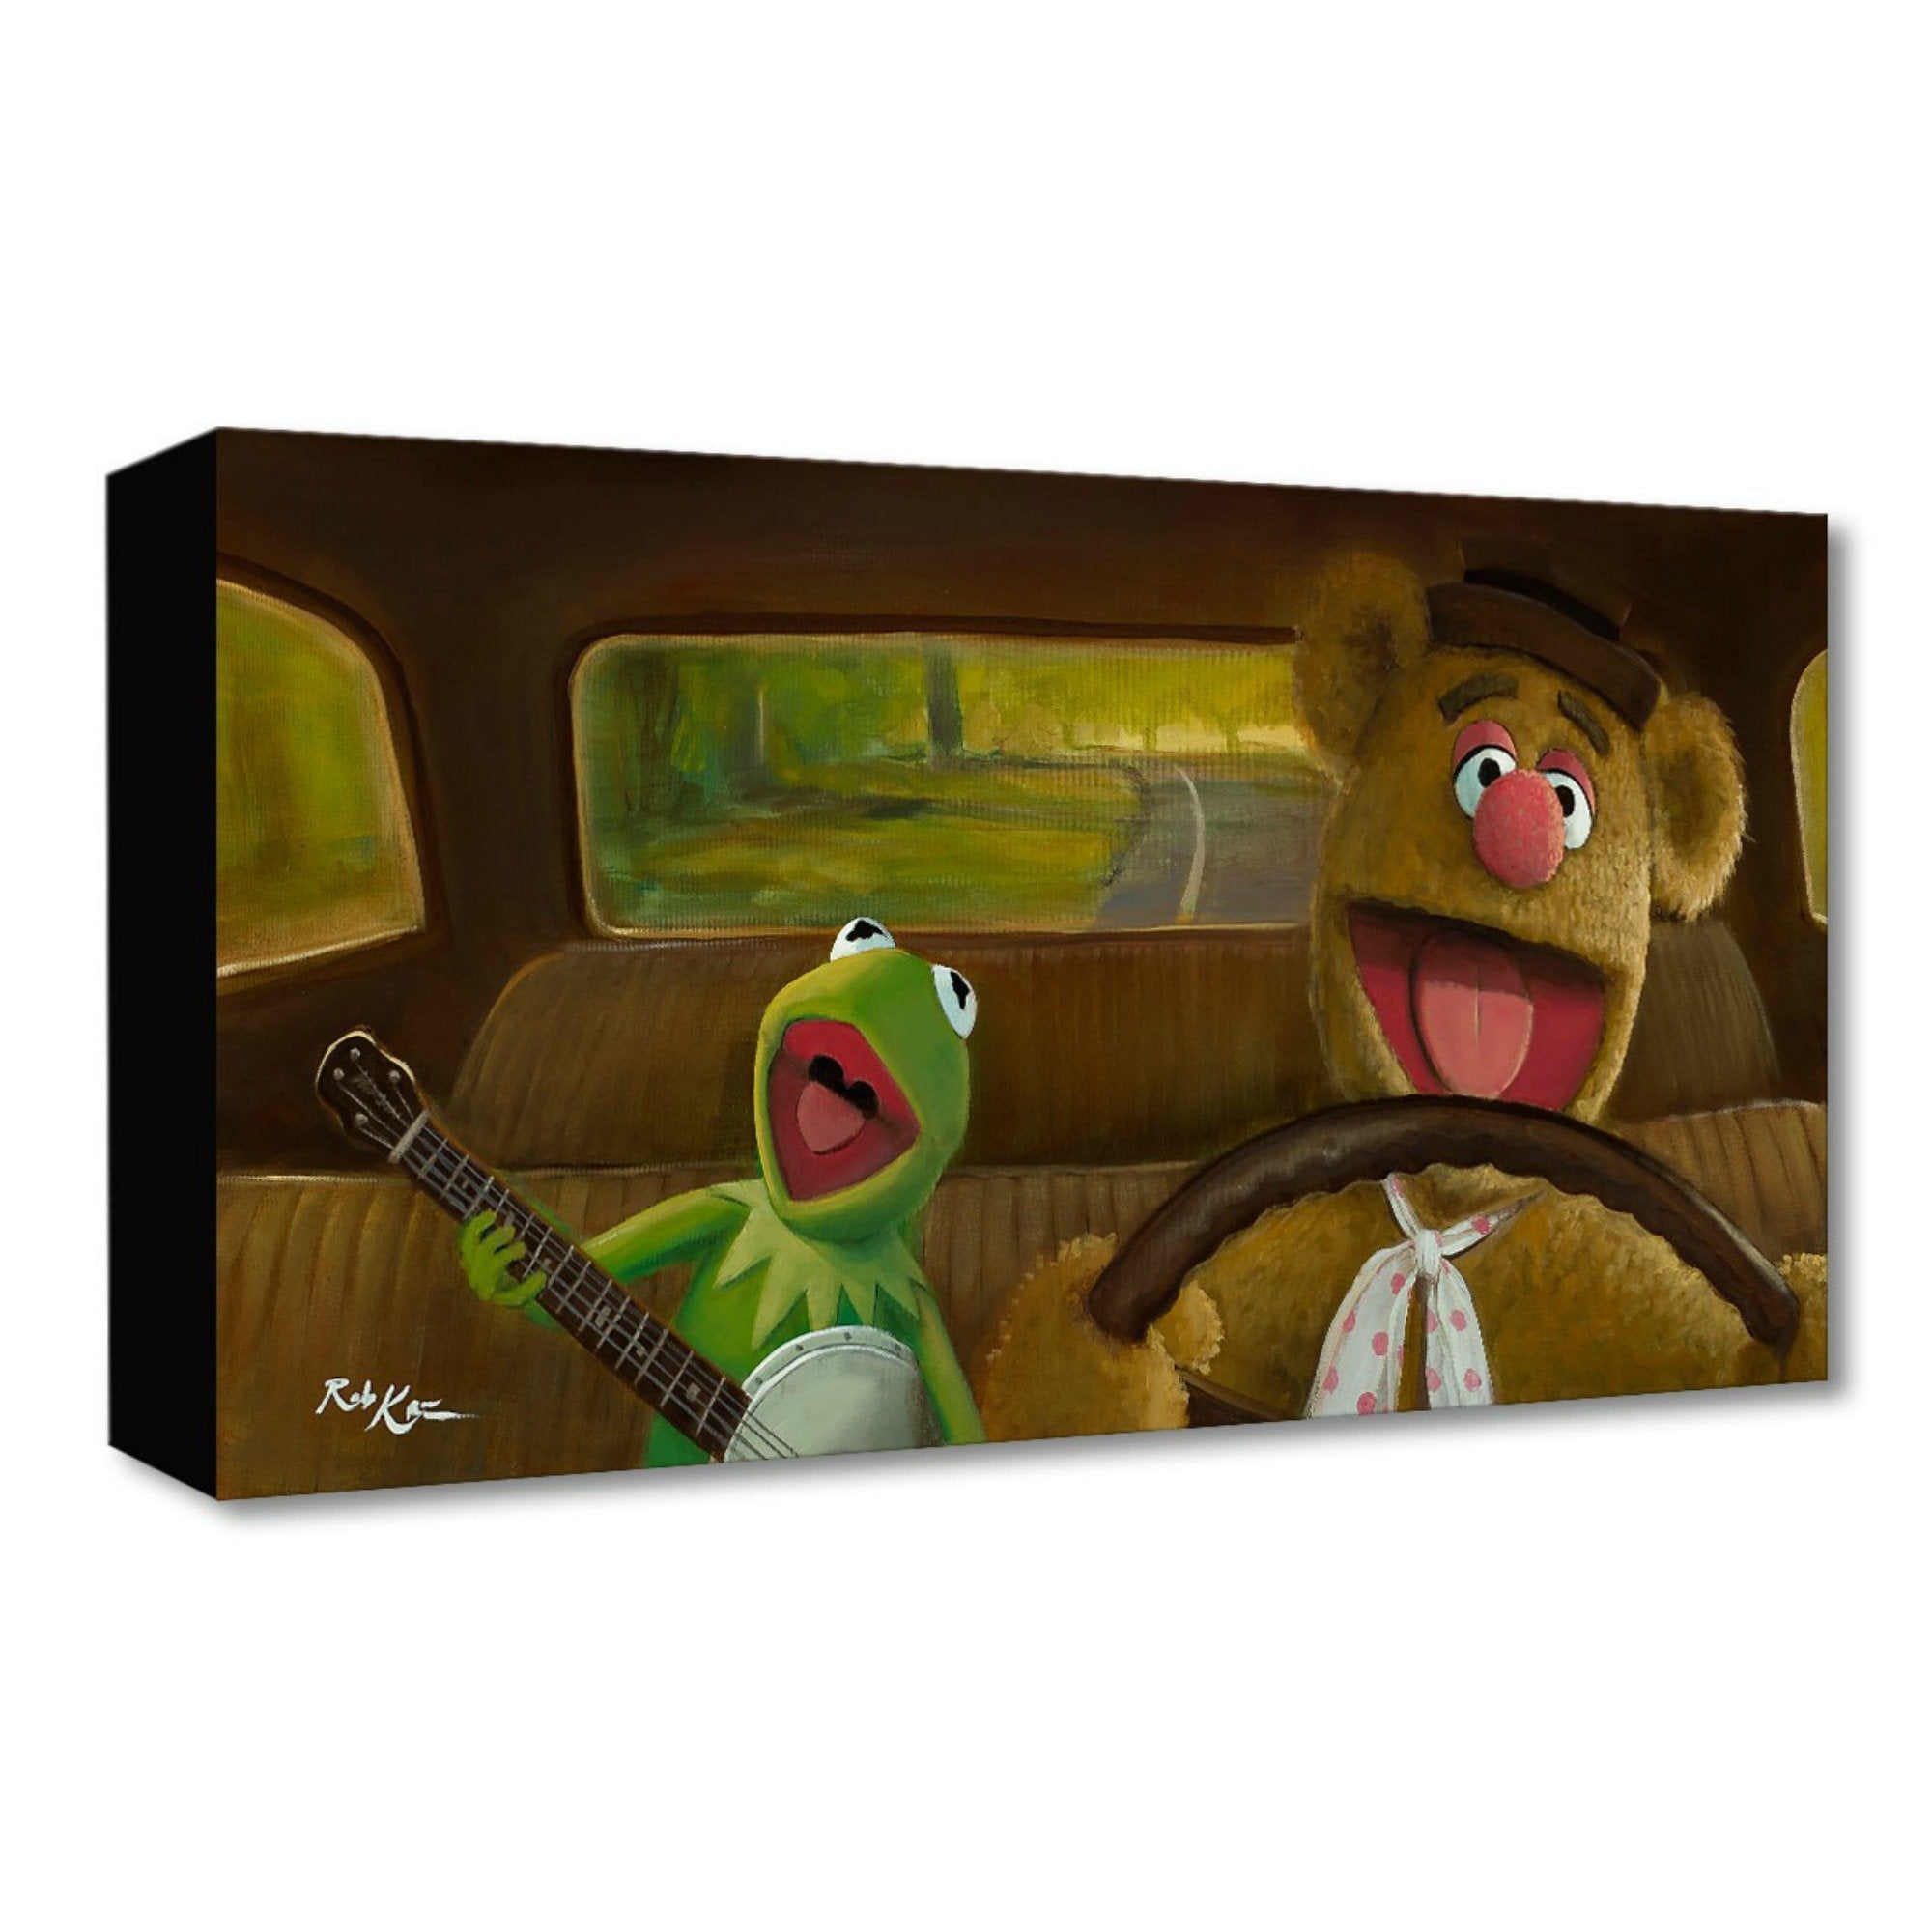 Movin Right Along by Rob Kaz.  Fozzie the bear behind the driver's wheel, singing along with Kermit the Frog has he plays his banjo. 